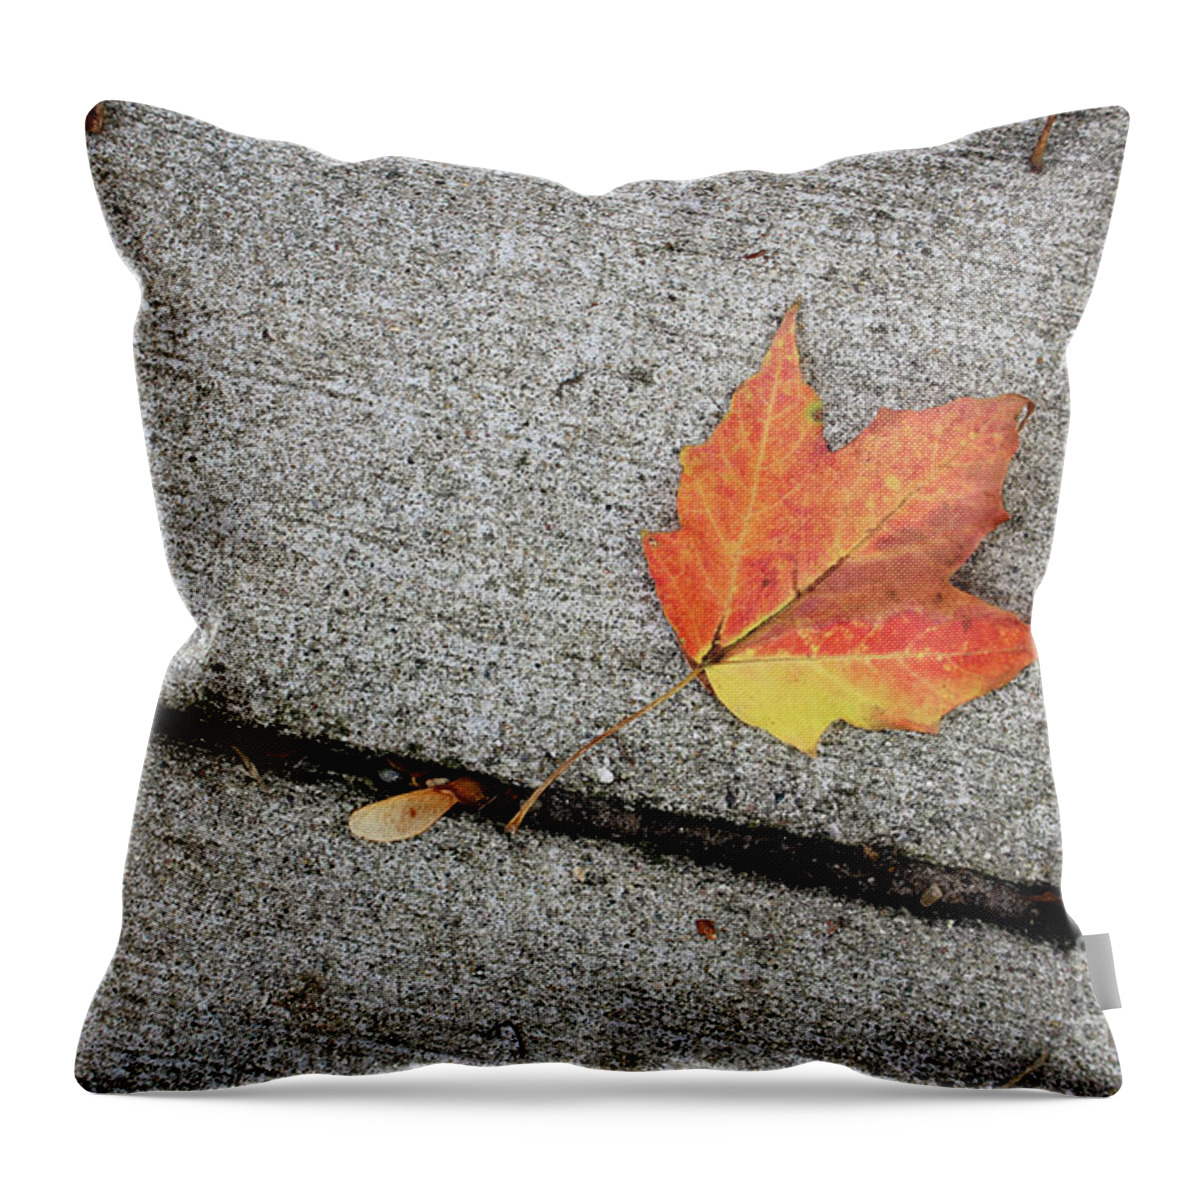 Autumn Throw Pillow featuring the photograph Autumn Leaf by Laura Kinker